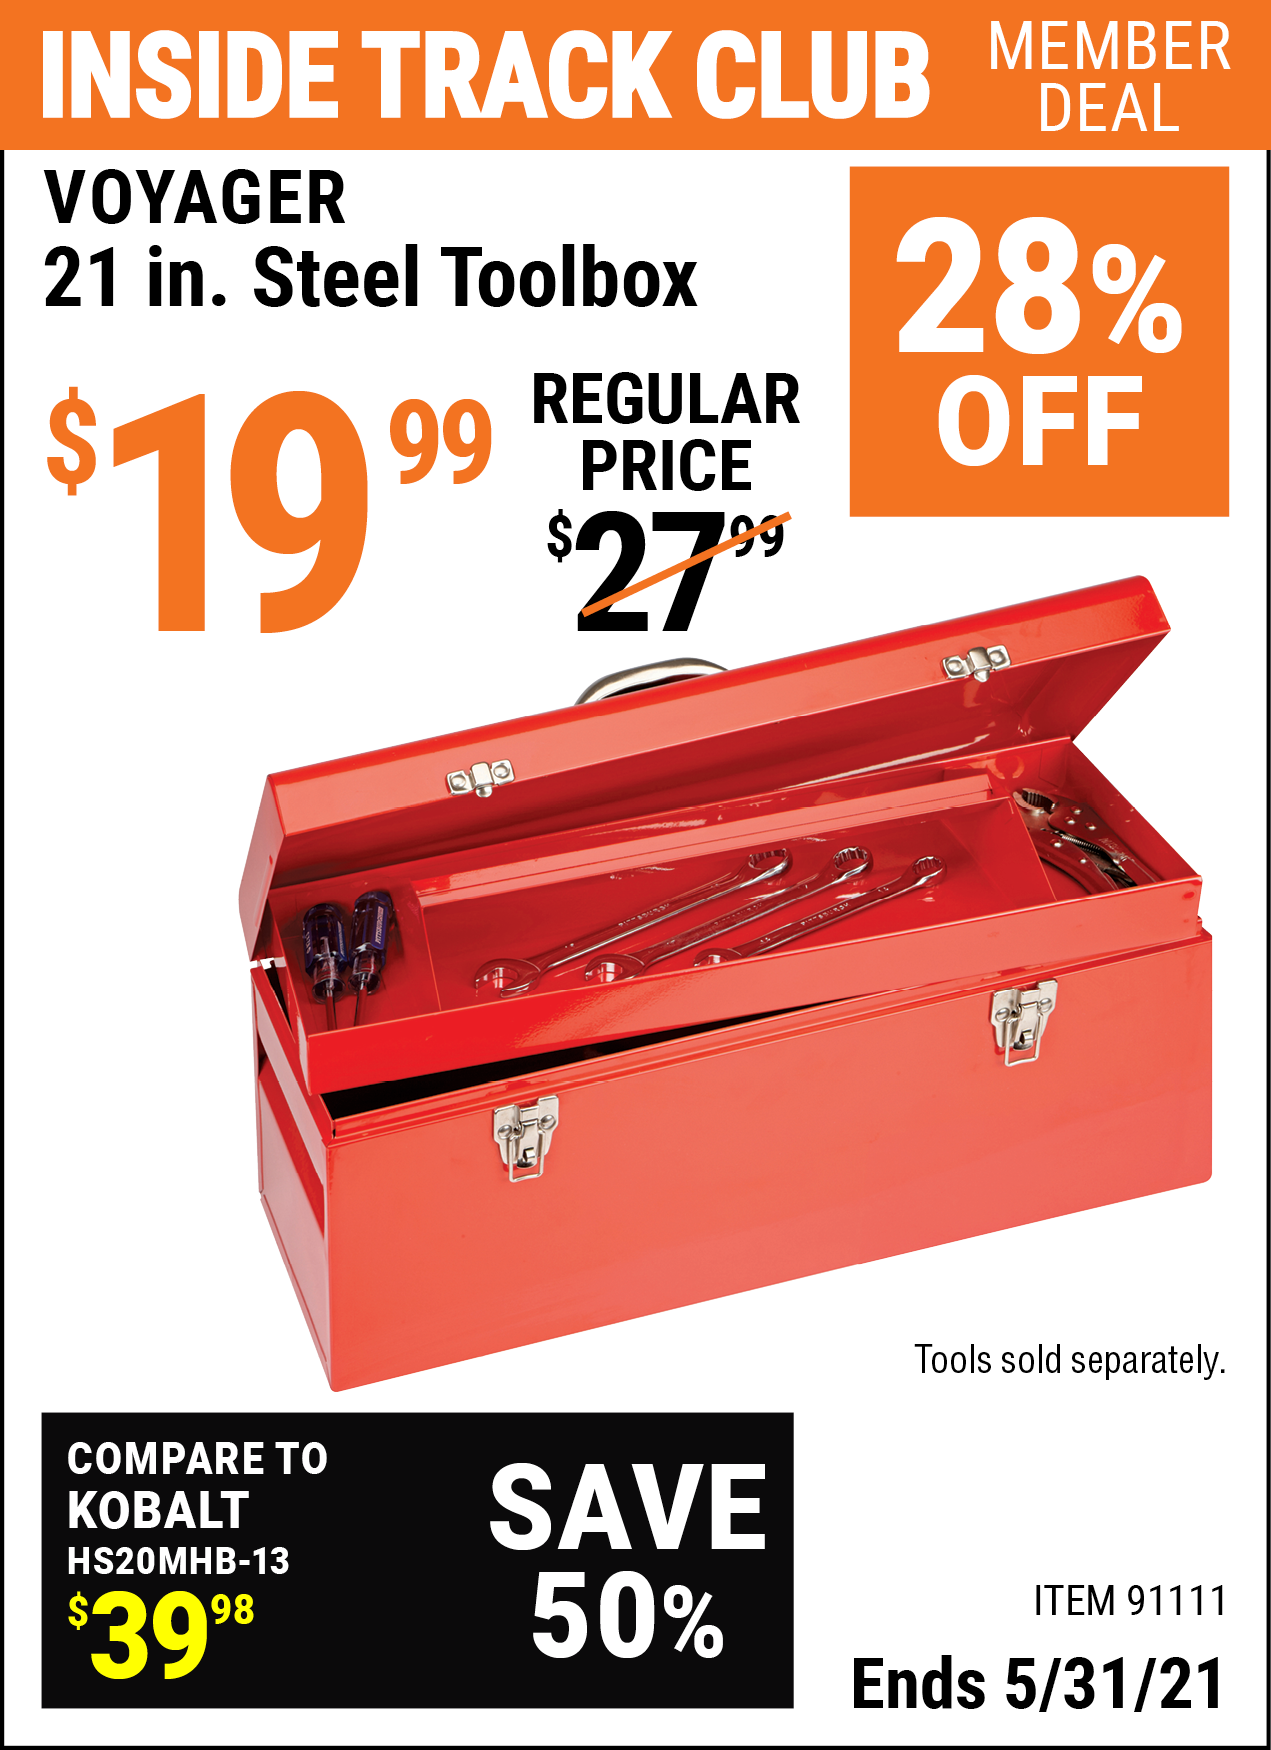 Inside Track Club members can buy the VOYAGER 21 In Steel Toolbox (Item 91111) for $19.99, valid through 5/31/2021.